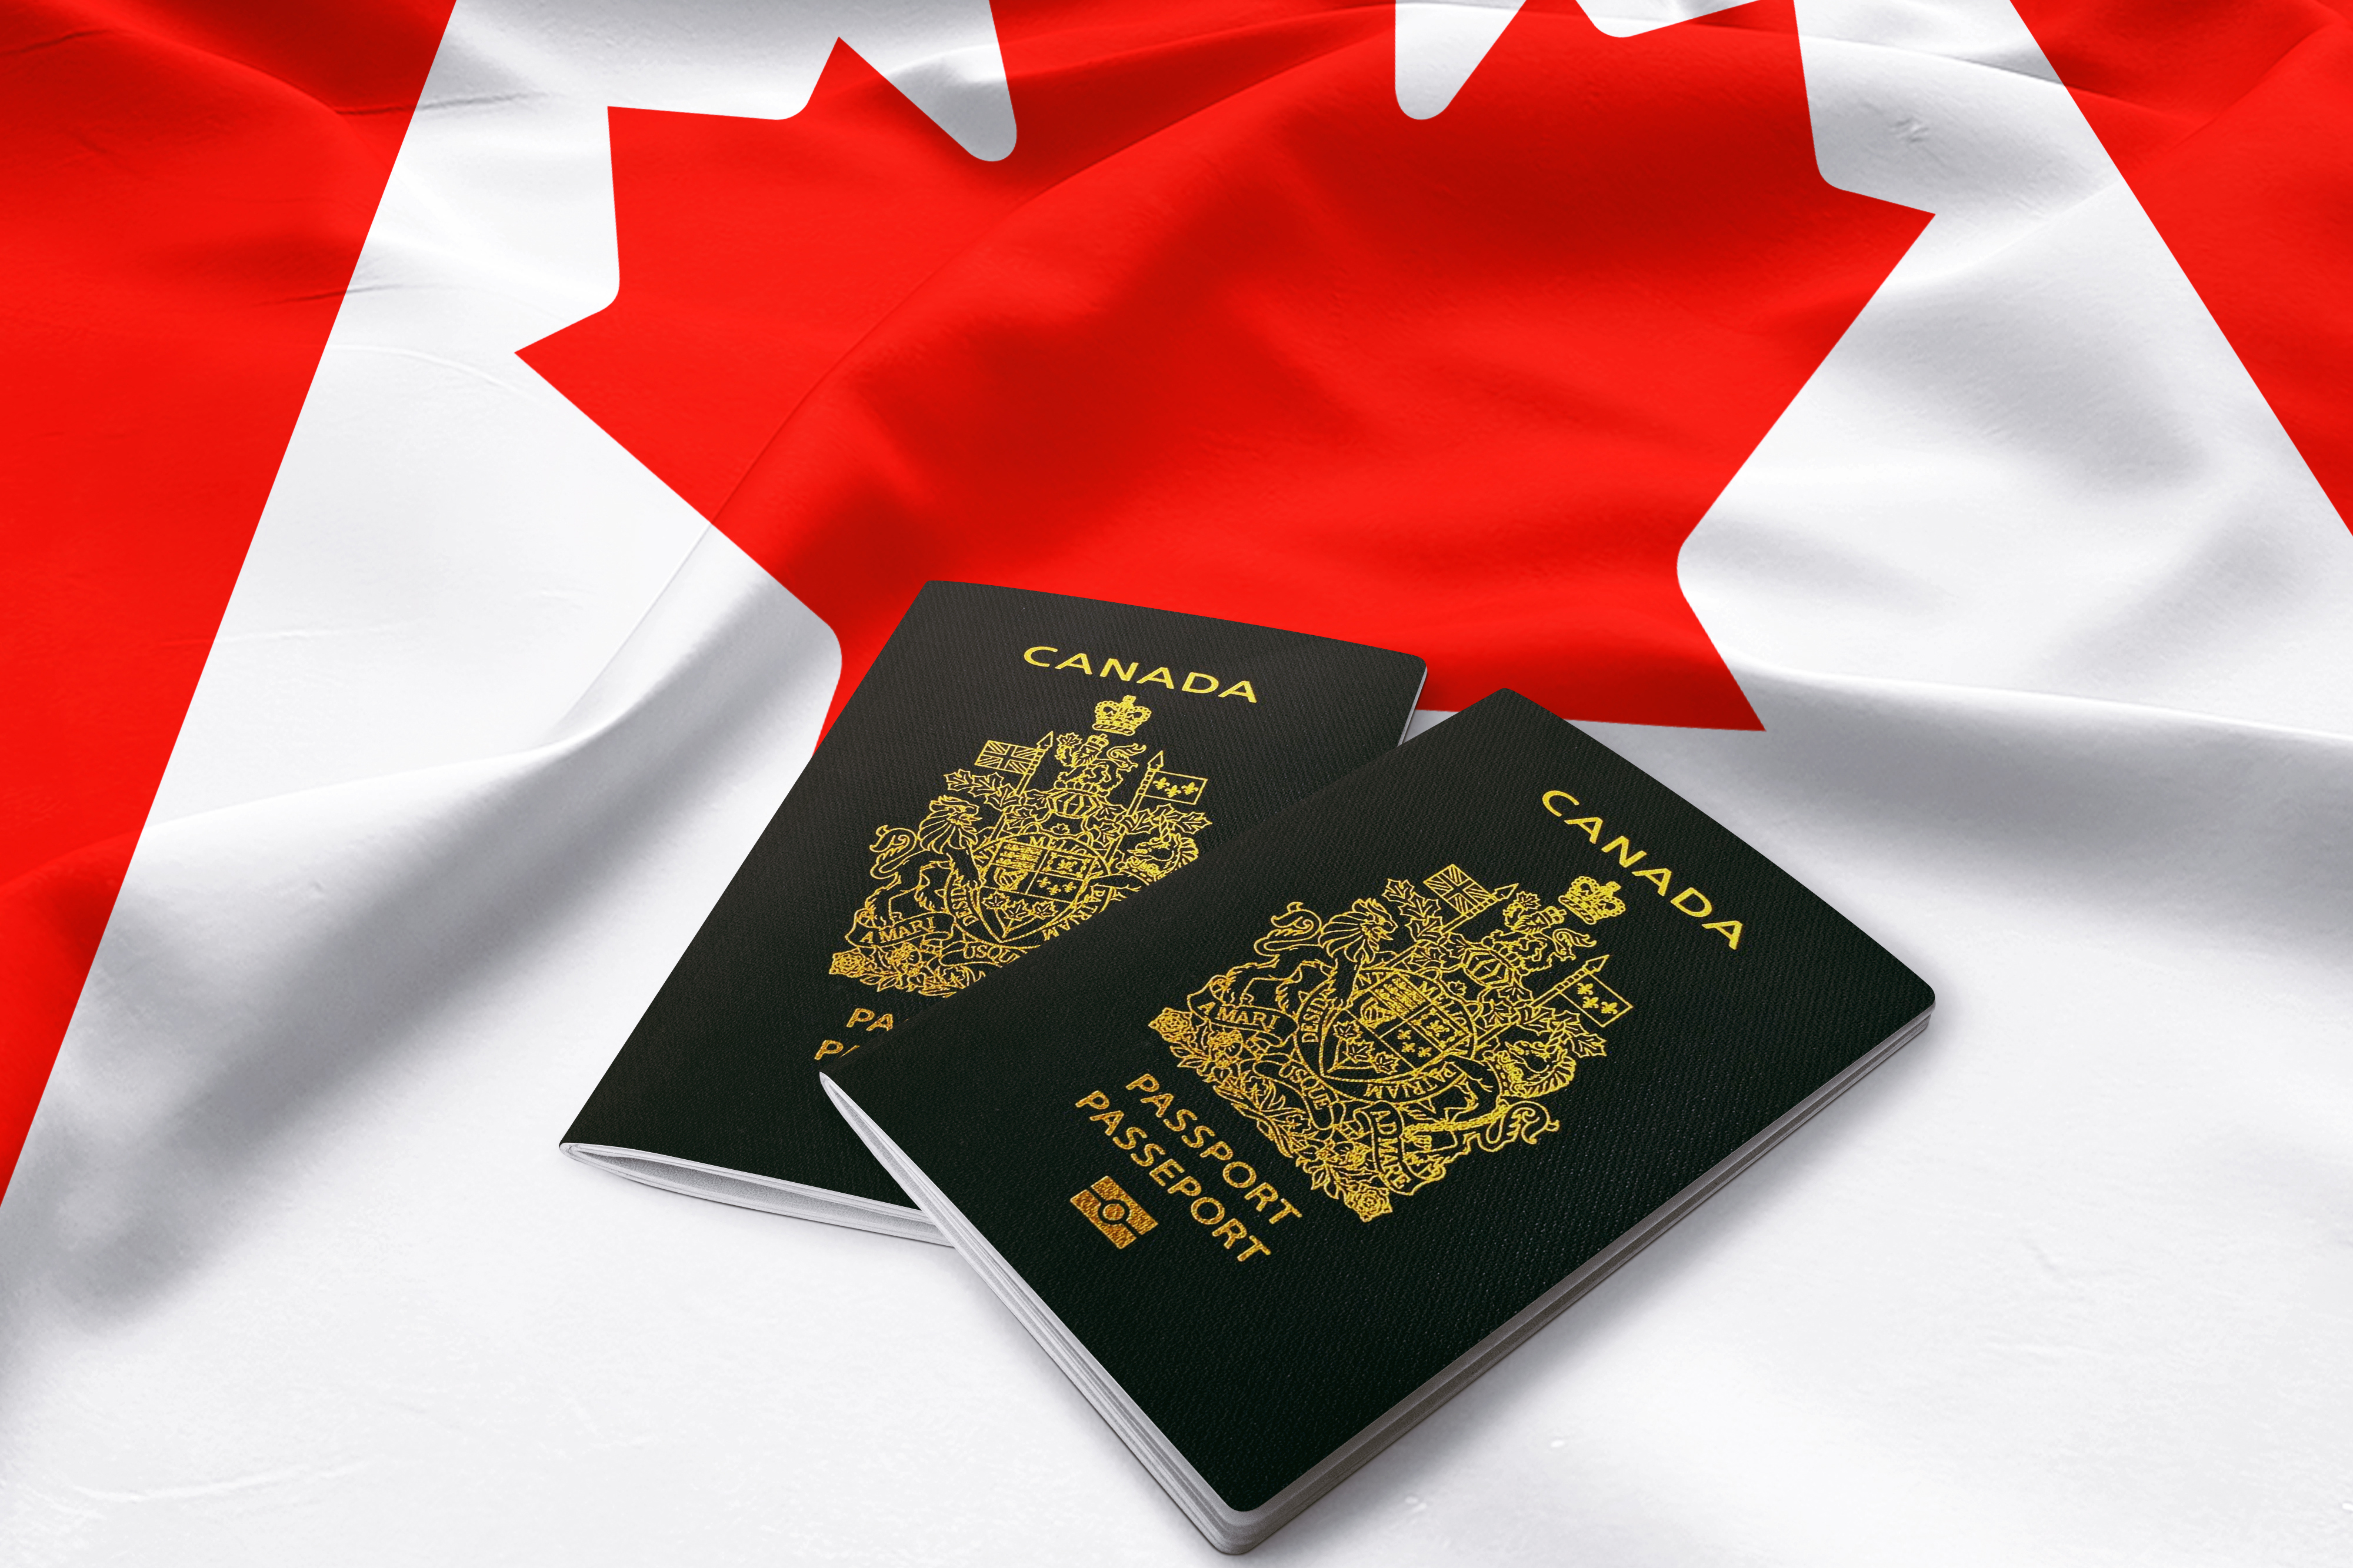 Canadian passports and flag as a symbol of self-employed persons program and immigration to Canada